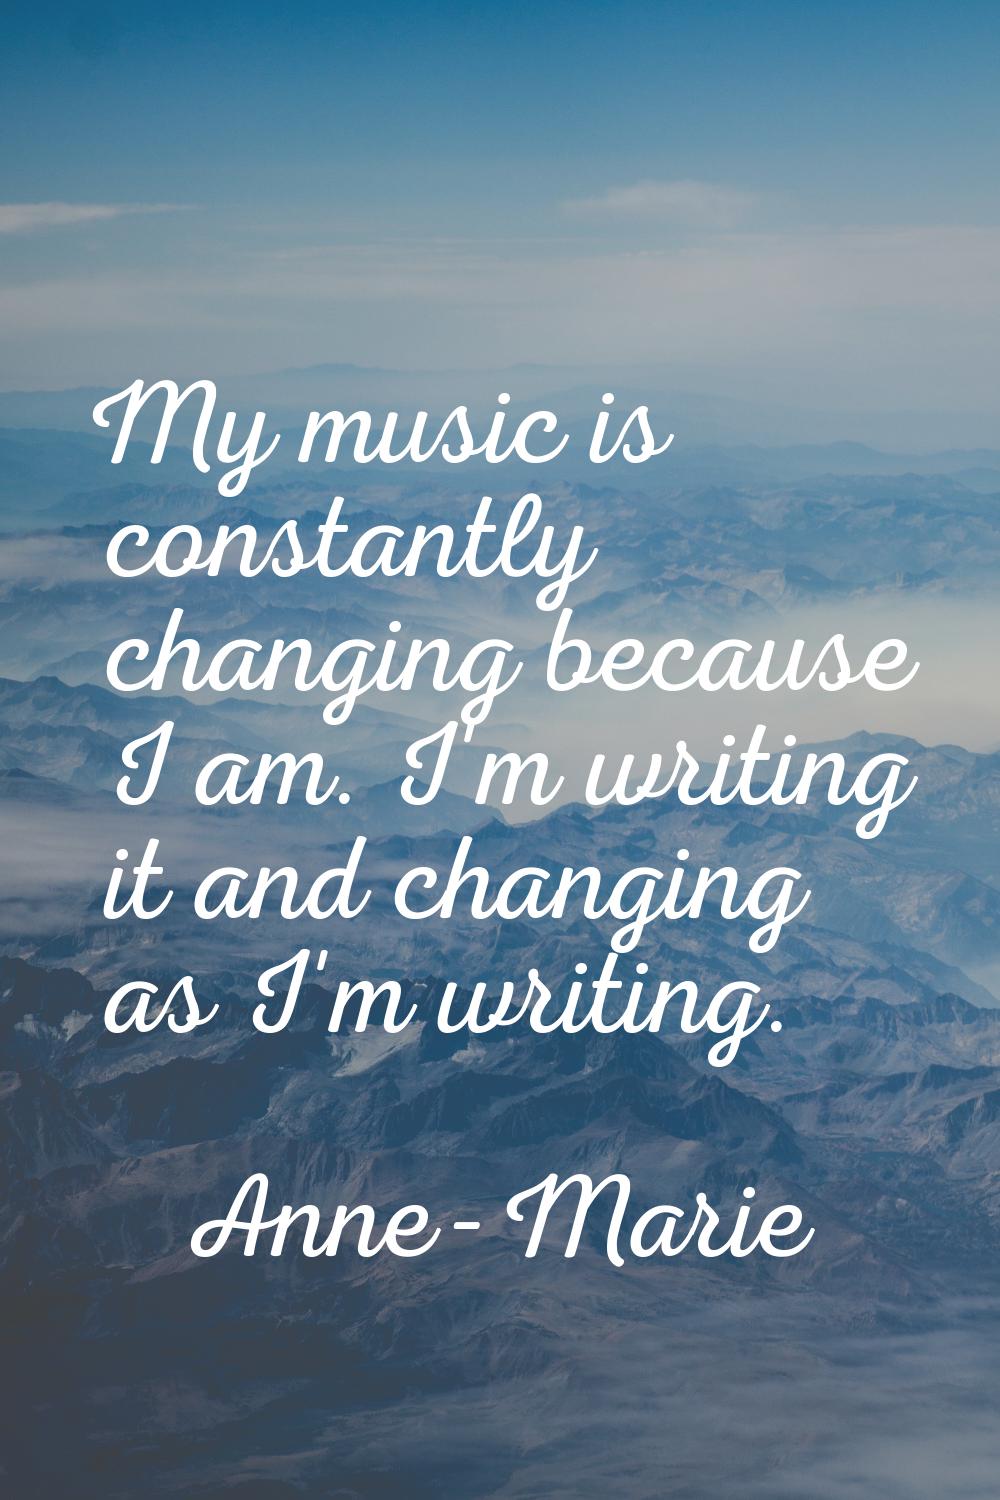 My music is constantly changing because I am. I'm writing it and changing as I'm writing.